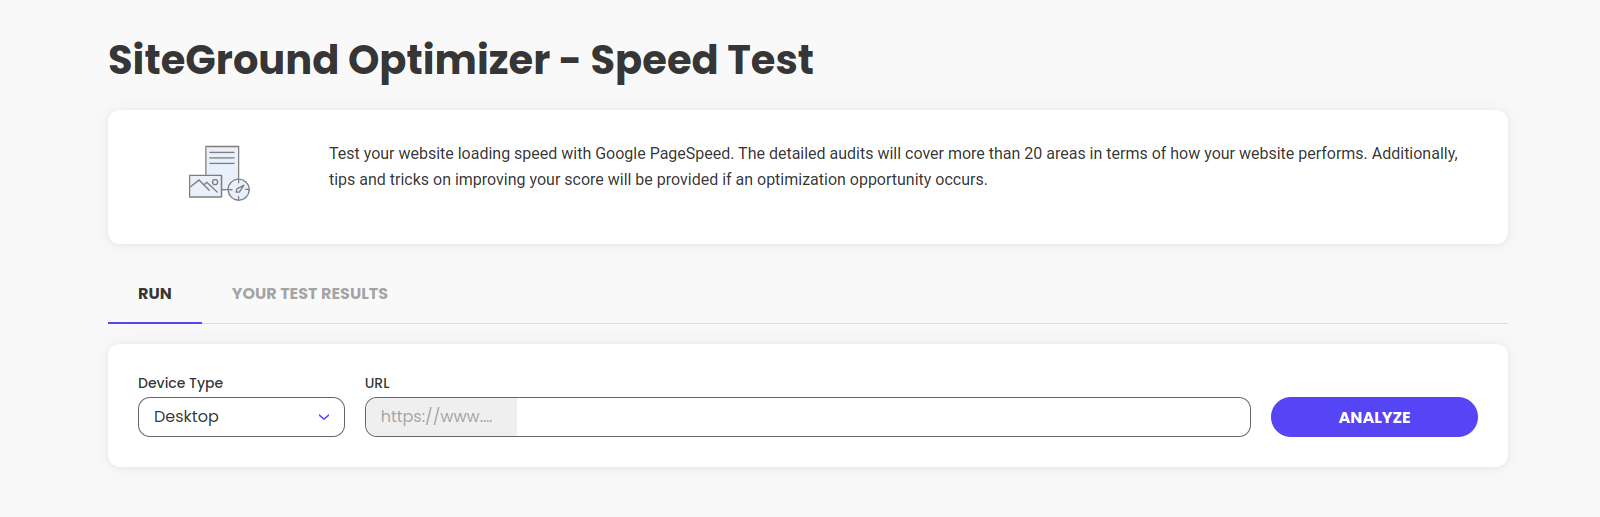 The SiteGround Optimizer Speed Test Page, allows you to test your site loading speed, as well as additional tips on improving your site performance.